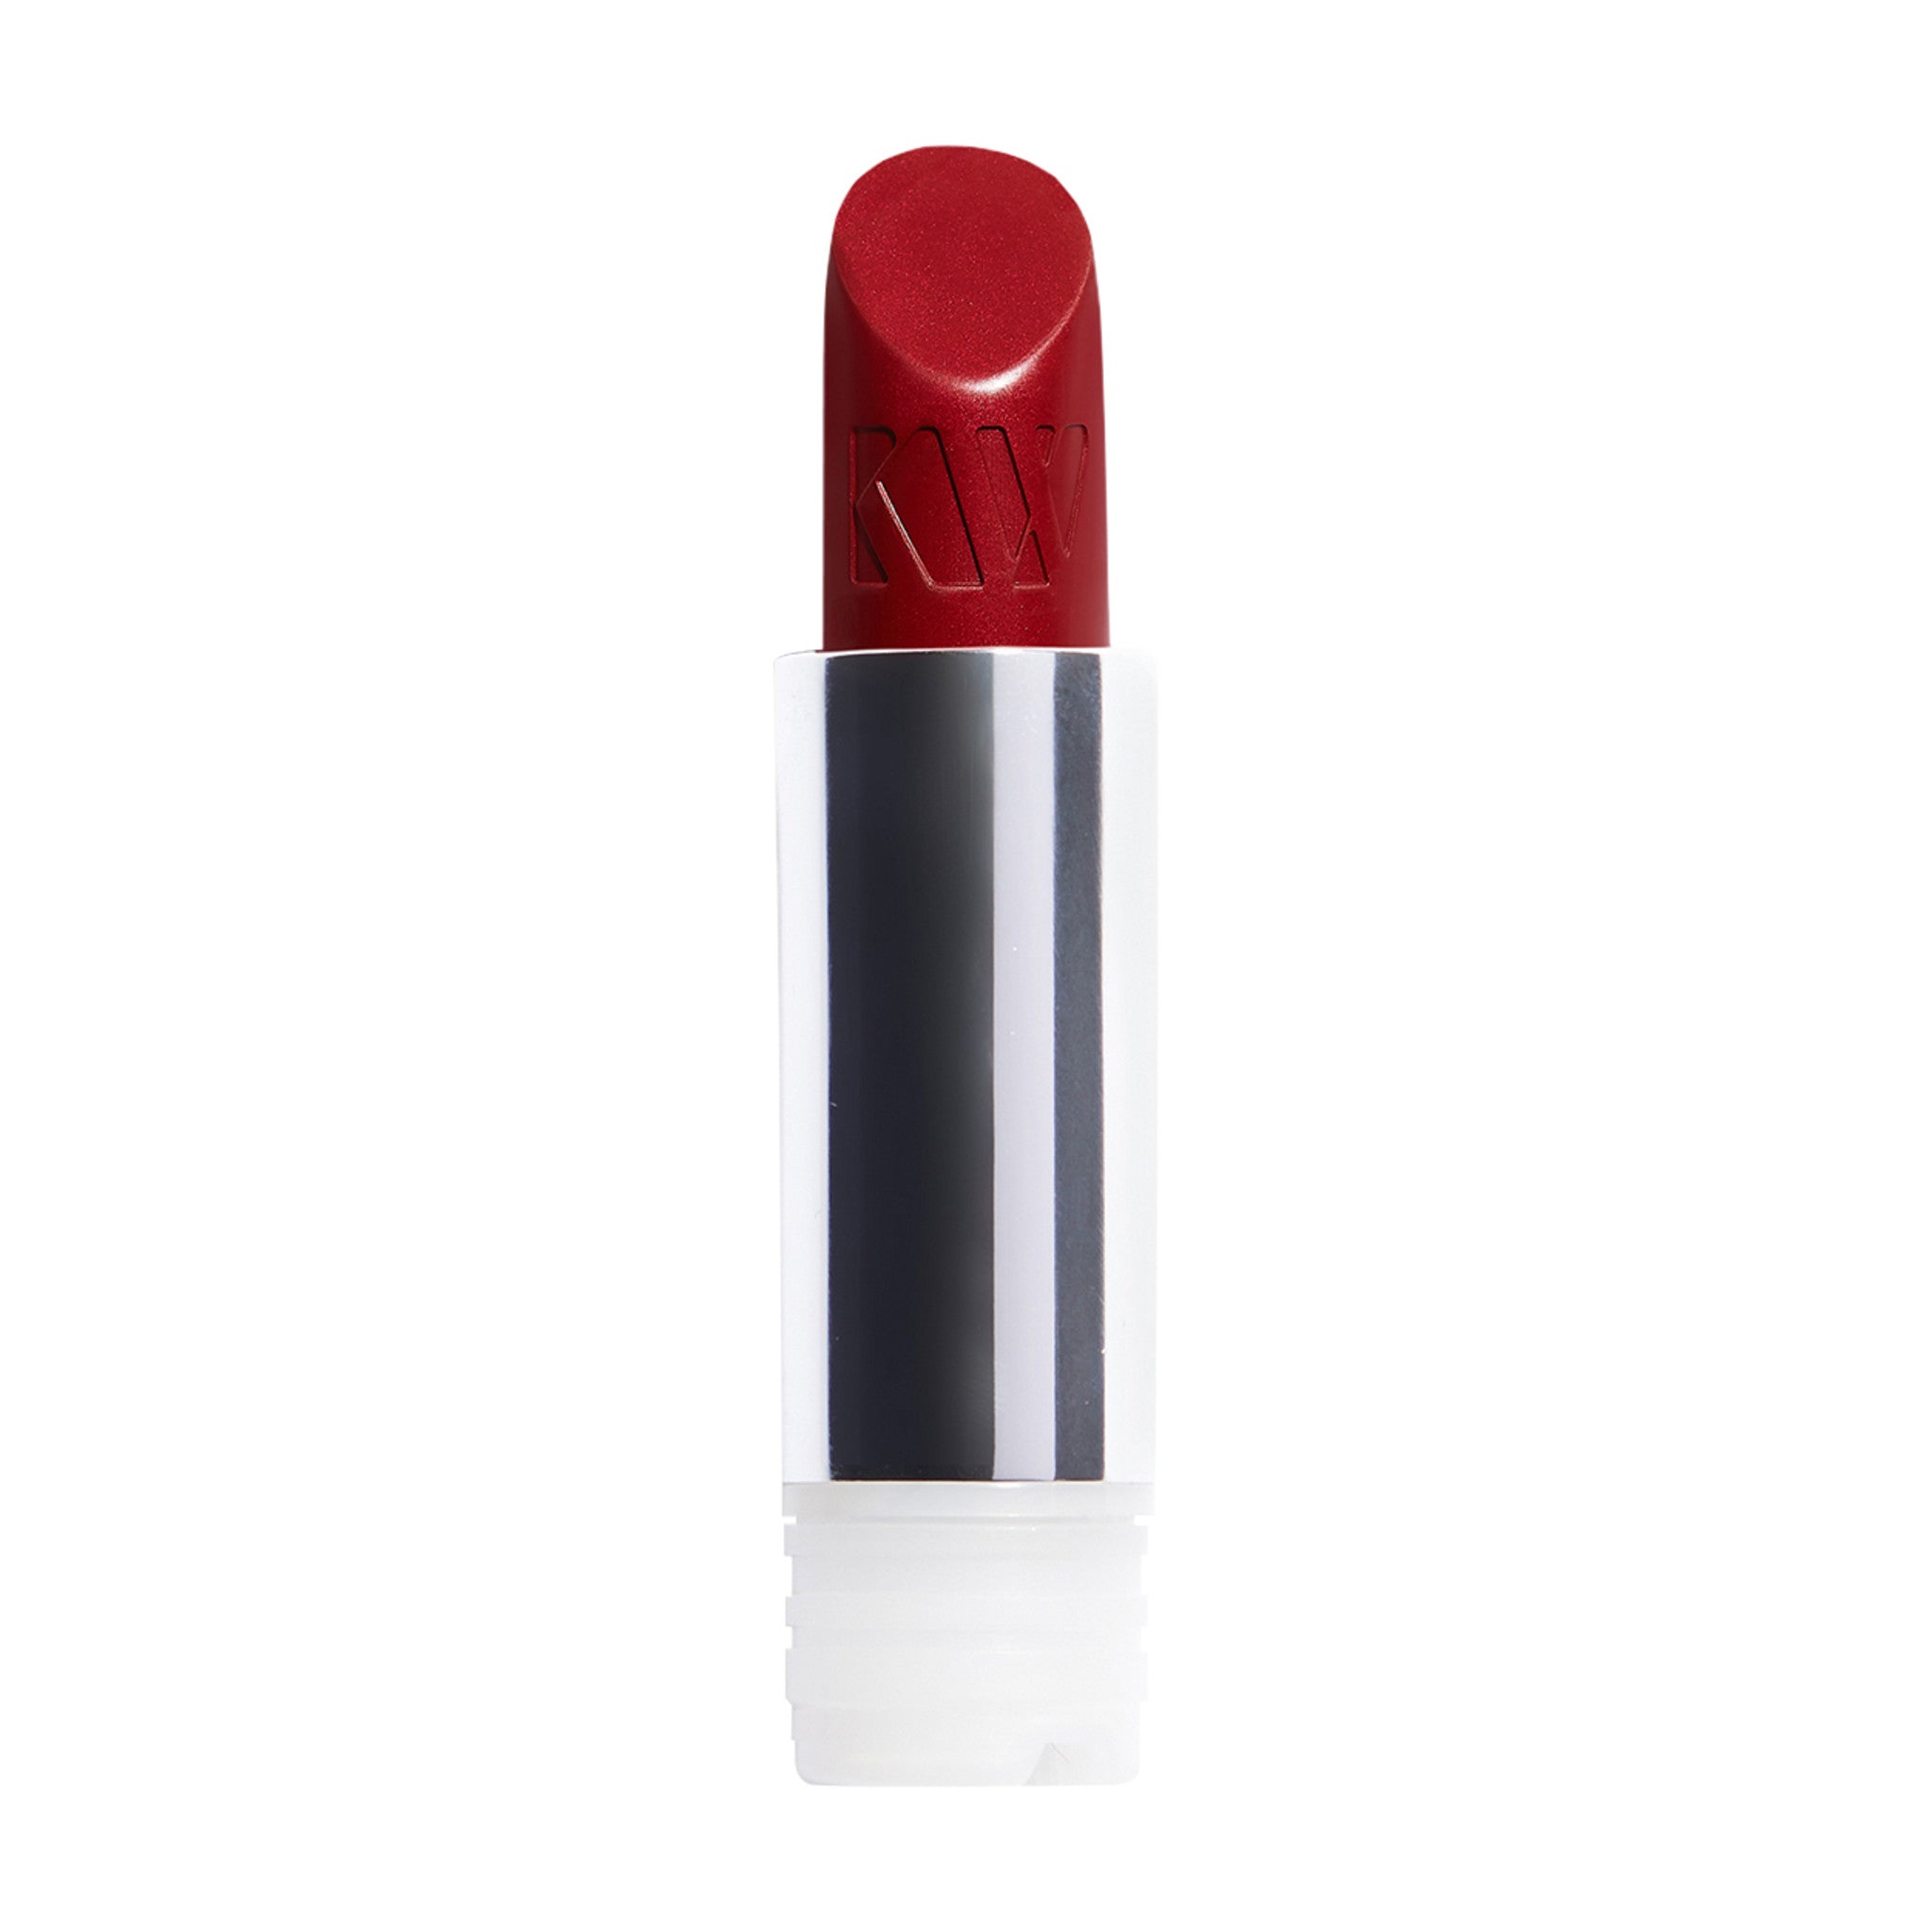 Kjaer Weis The Red Edit Lipstick Refill Color/Shade variant: Fearless main image. This product is in the color red